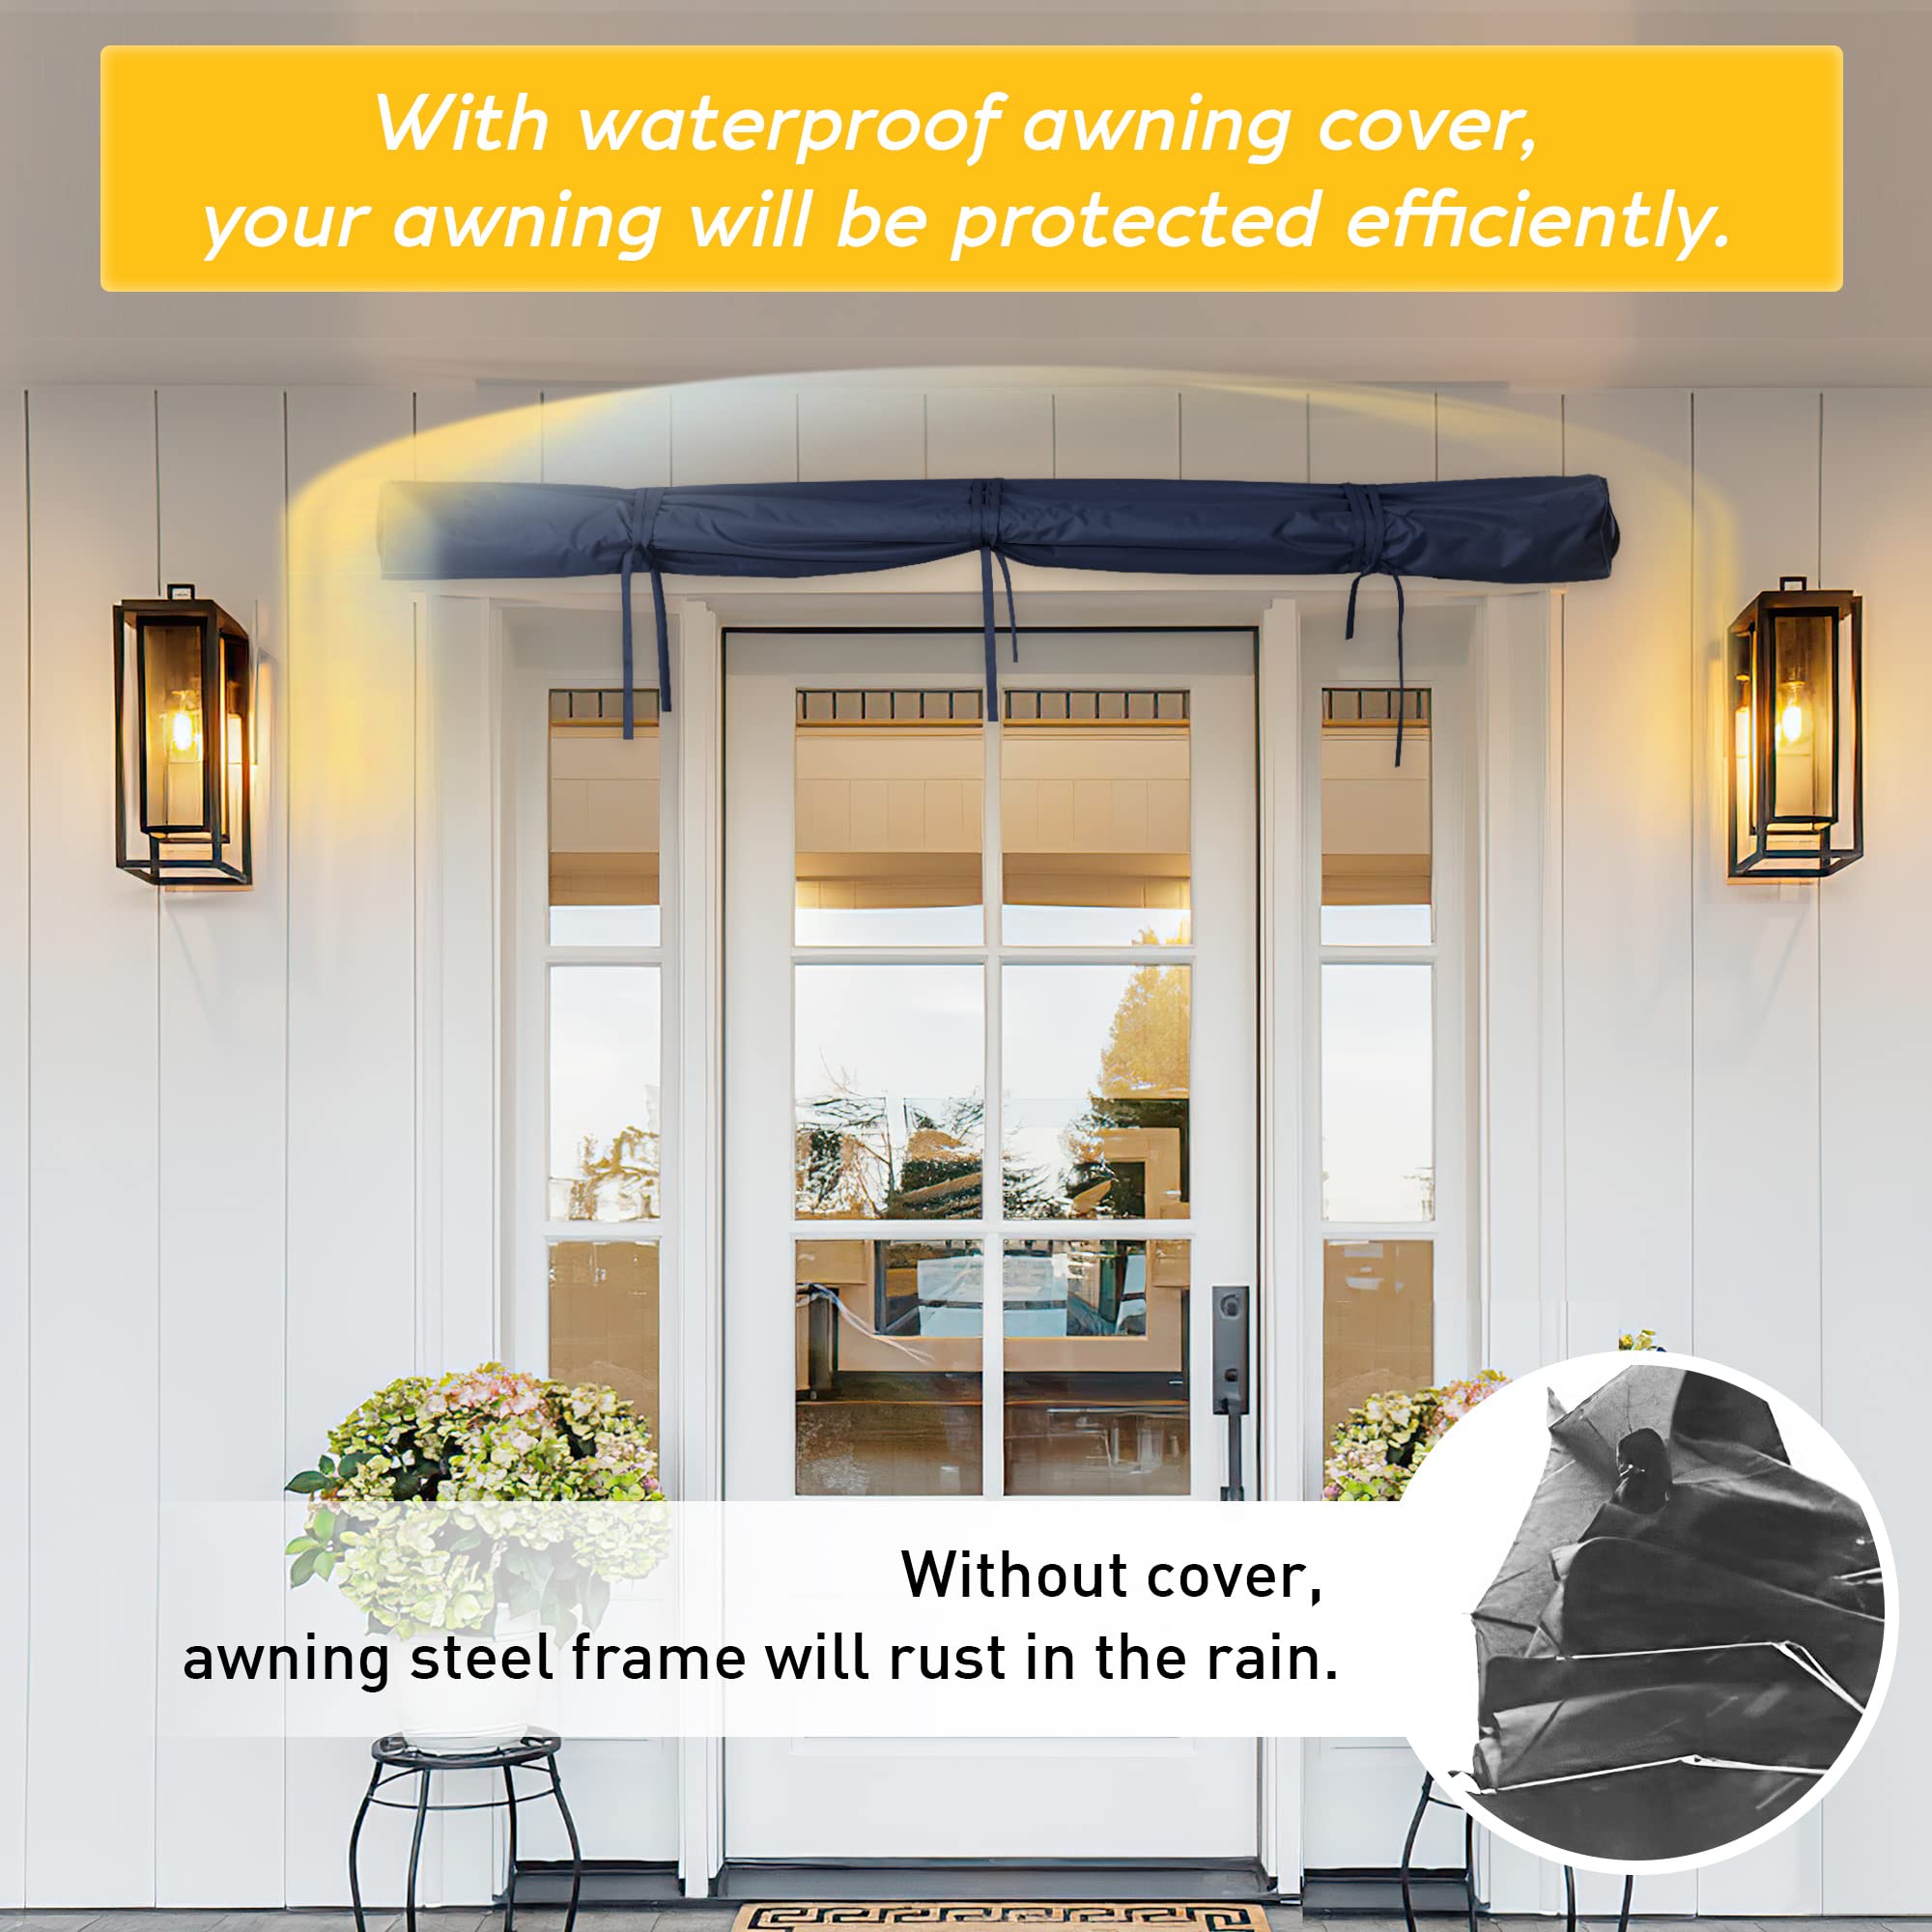 Water Resist 600D Heavy Duty Oxford Fabric Storage Bag, Warp Round Protective Rain Cover for RV Car Retractable Awning